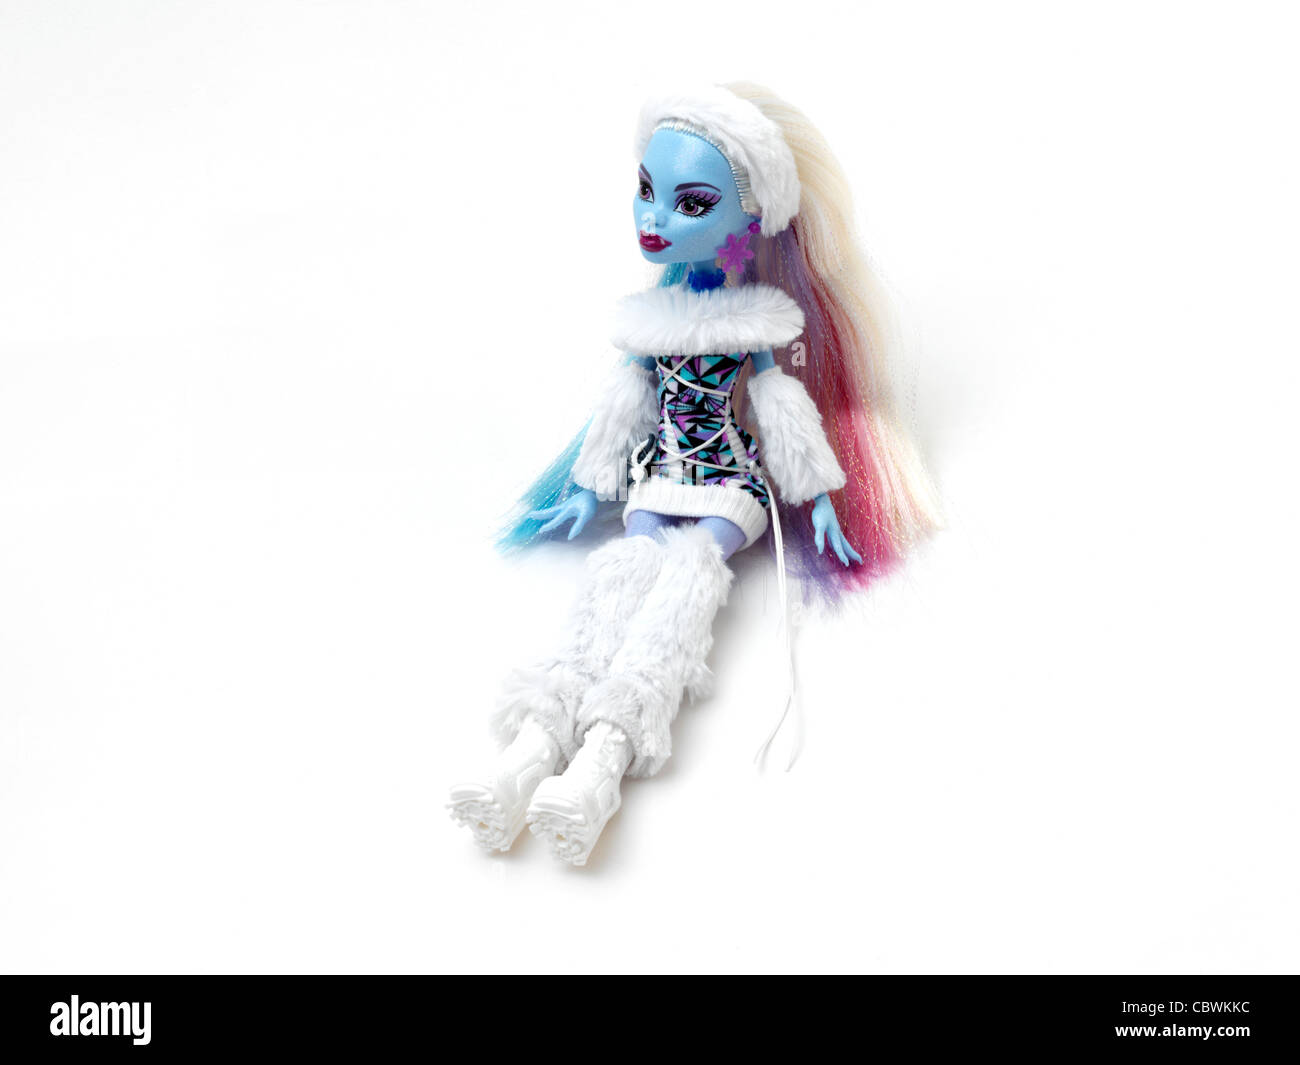 Monster High Doll Abbey Bominable Daughter Of A Yeti With Blue Skin And  Wearing Fur Stock Photo - Alamy